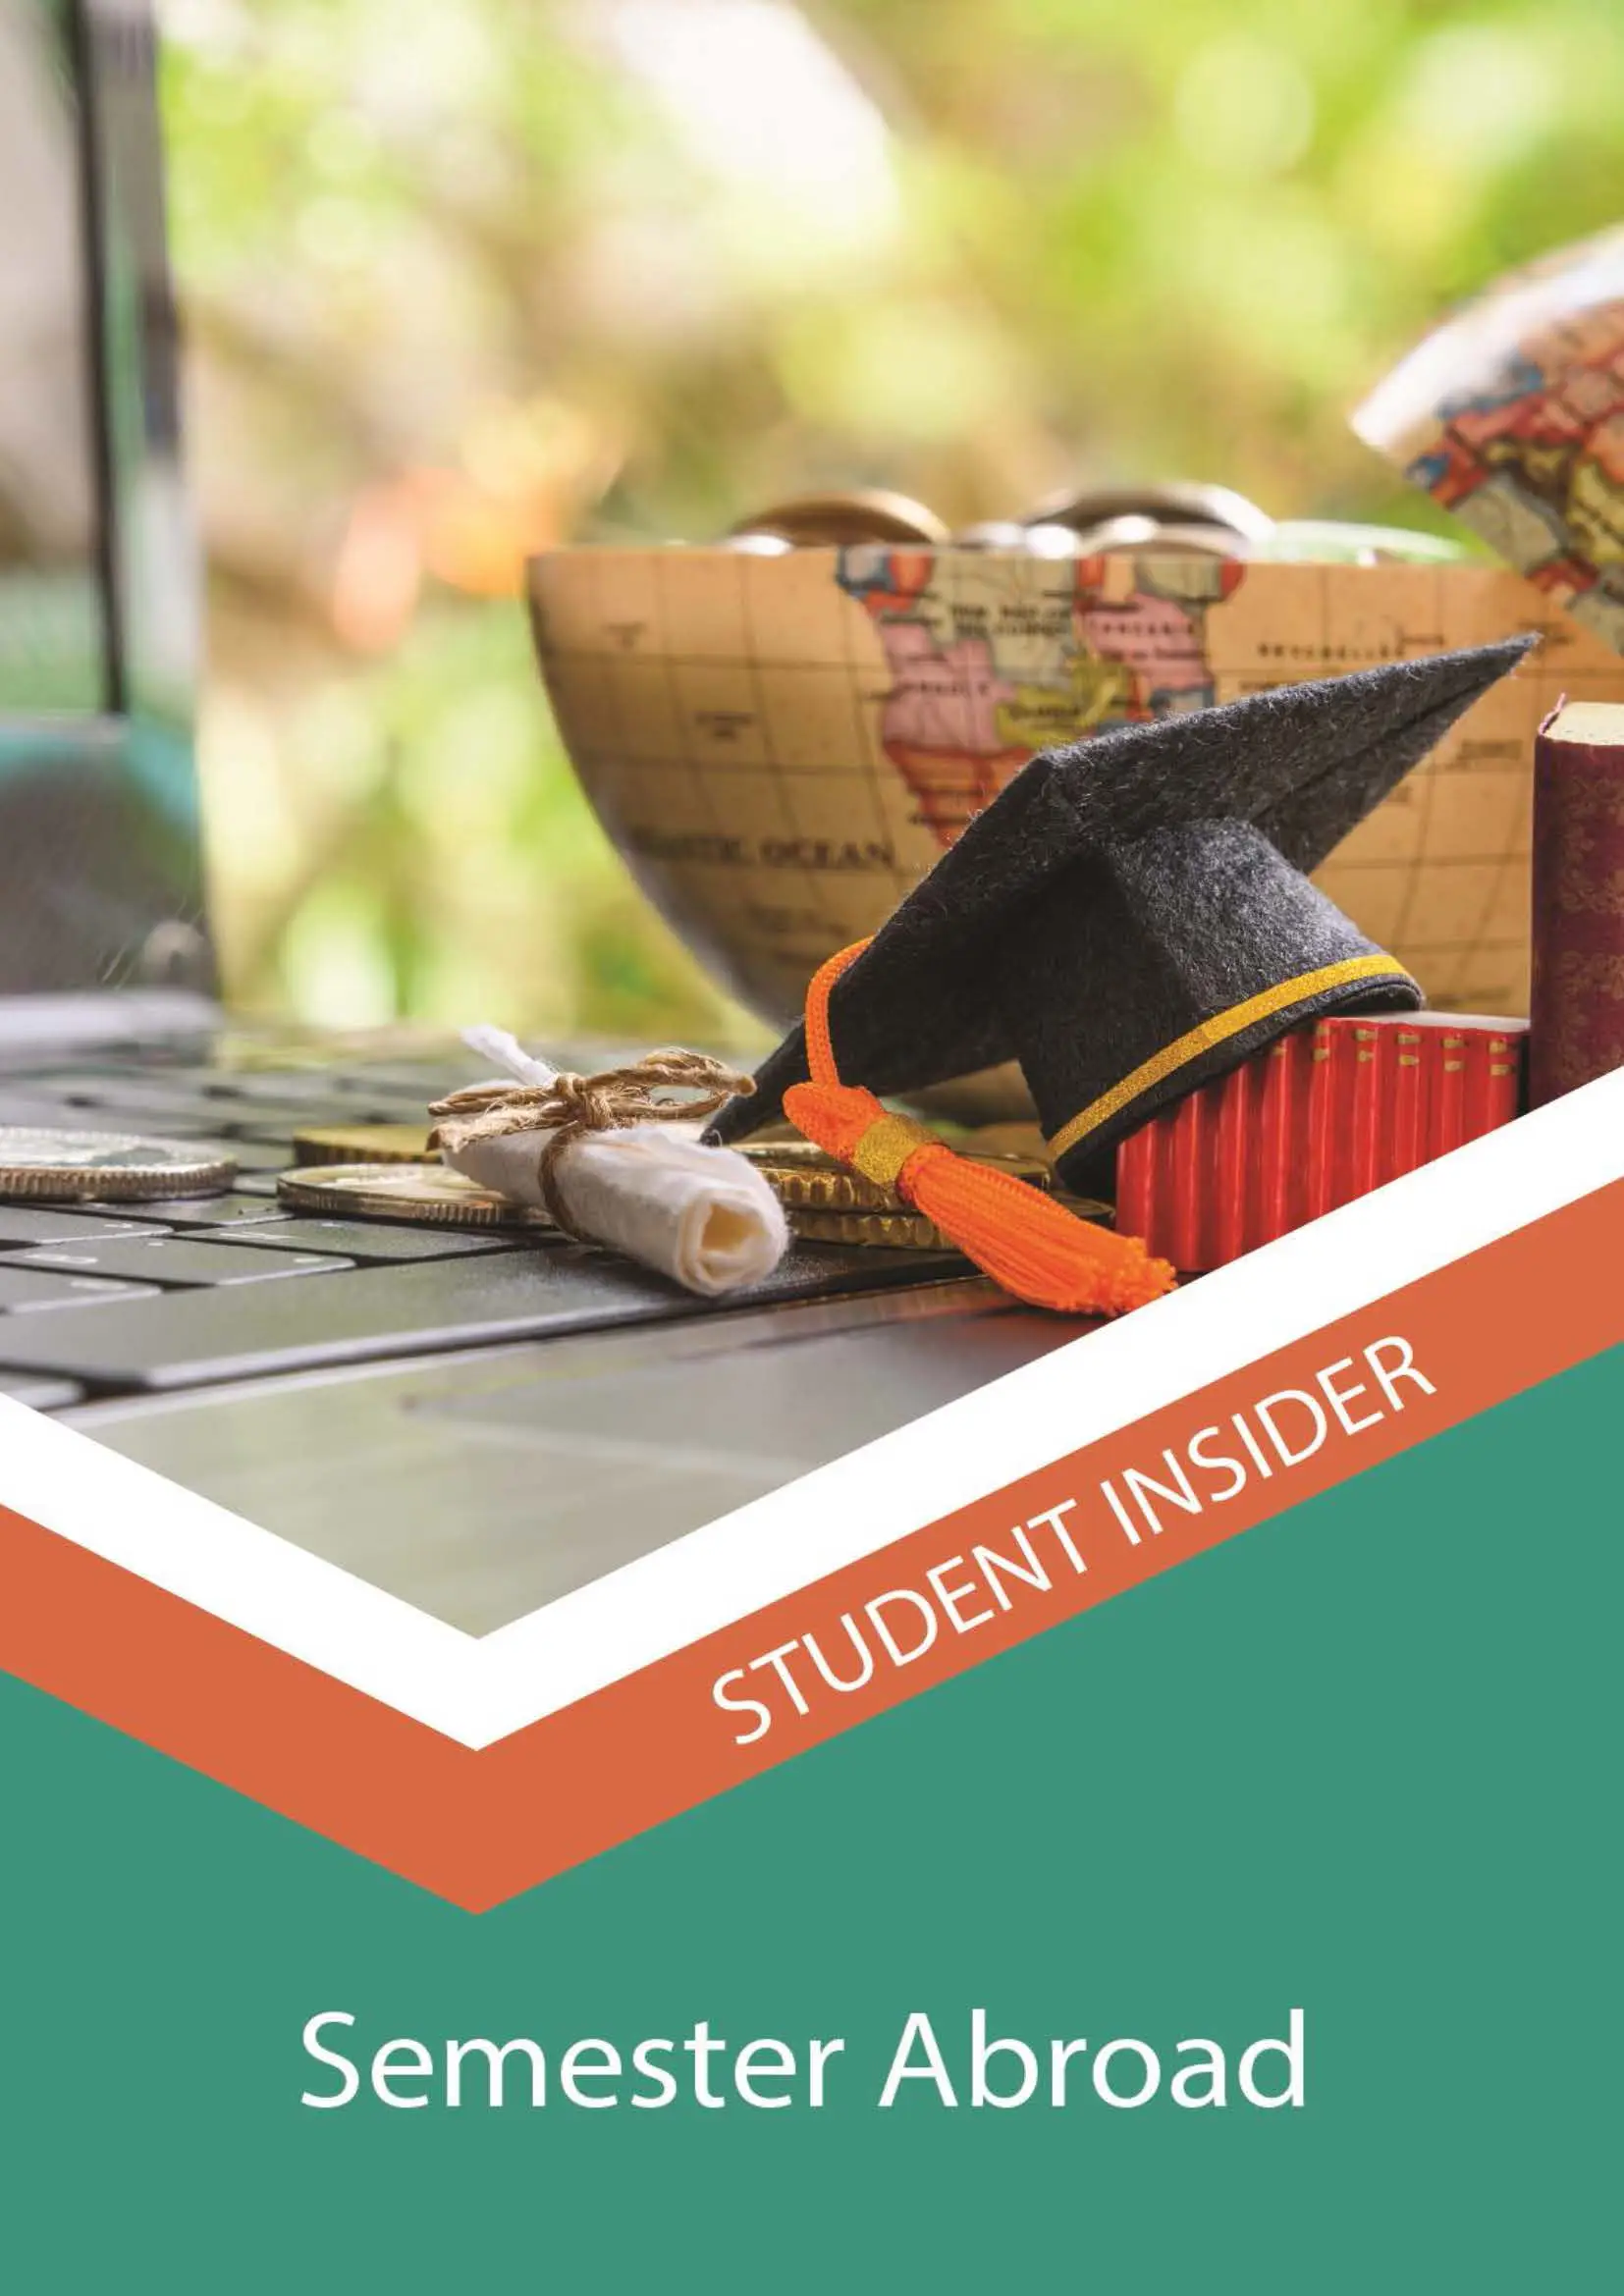 Student Insider Guide Semester Abroad